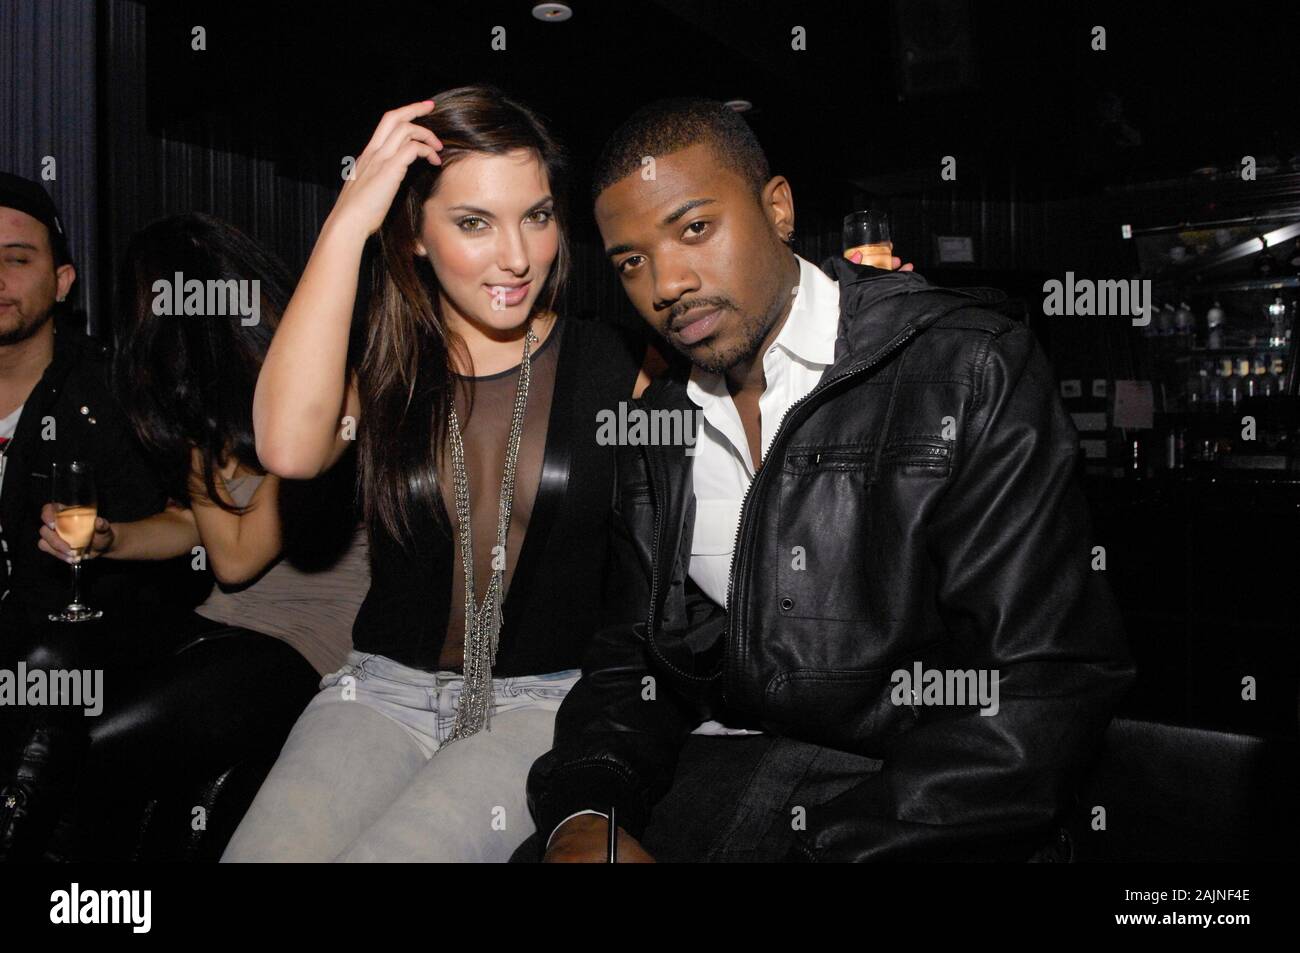 Singer / Actor Ray J Norwood (r) at Wonderland on January 21, 2010 in Hollywood, California. Stock Photo